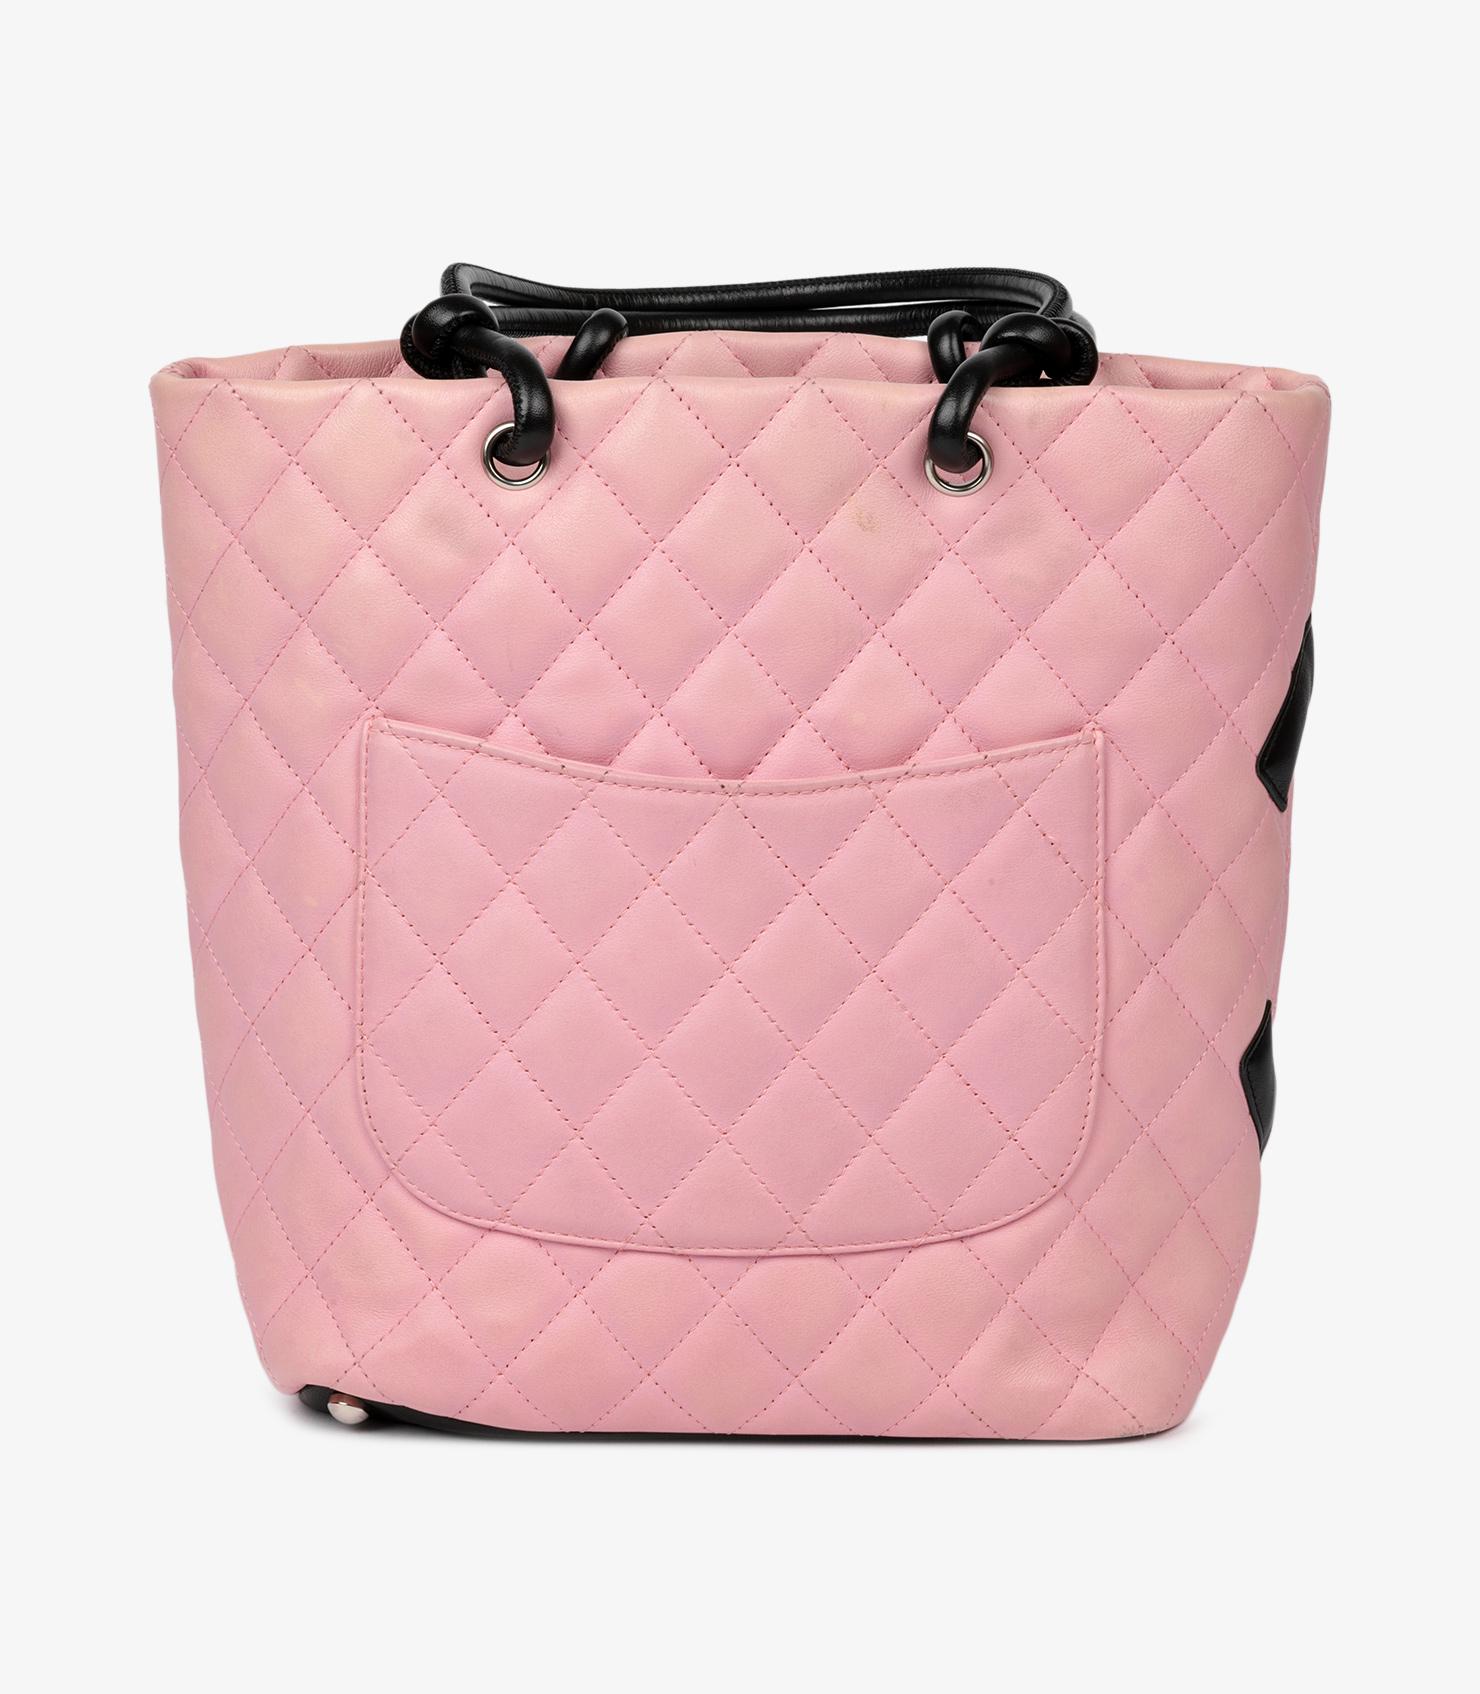 Women's Chanel Pink Quilted Calfskin Leather Small Cambon Tote Bag